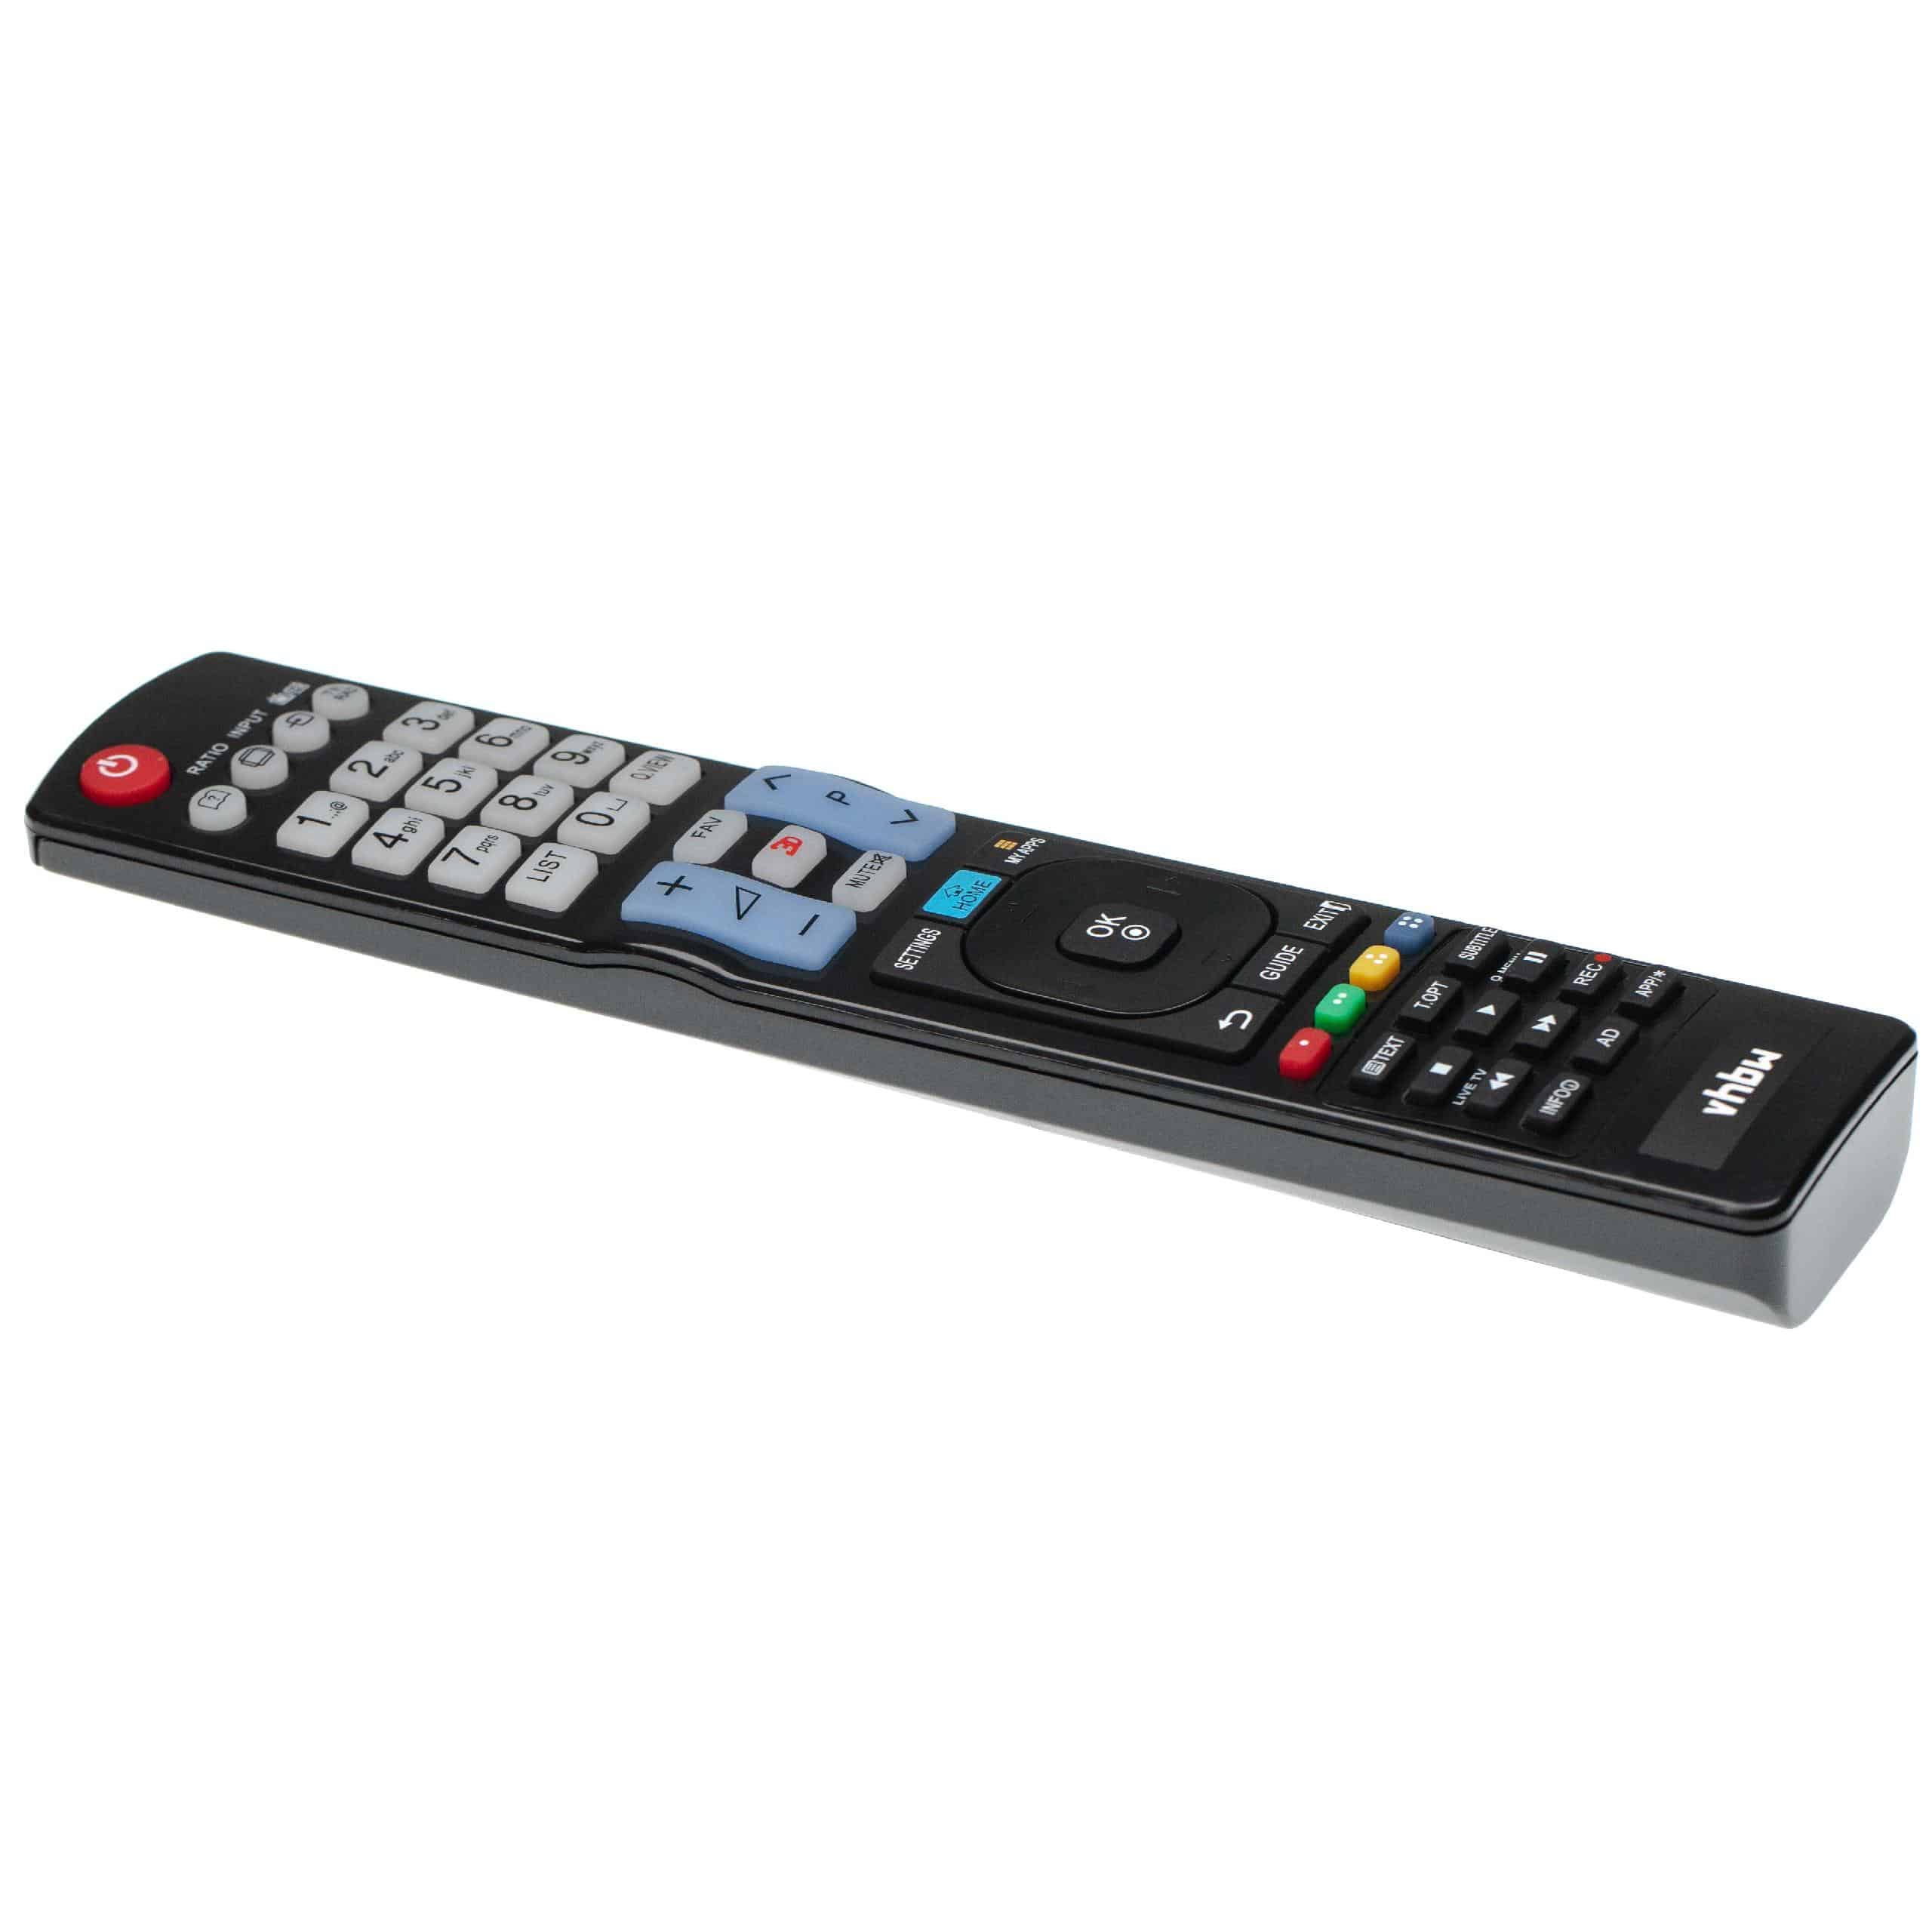 Remote Control replaces LG AKB73615362 for LG TV